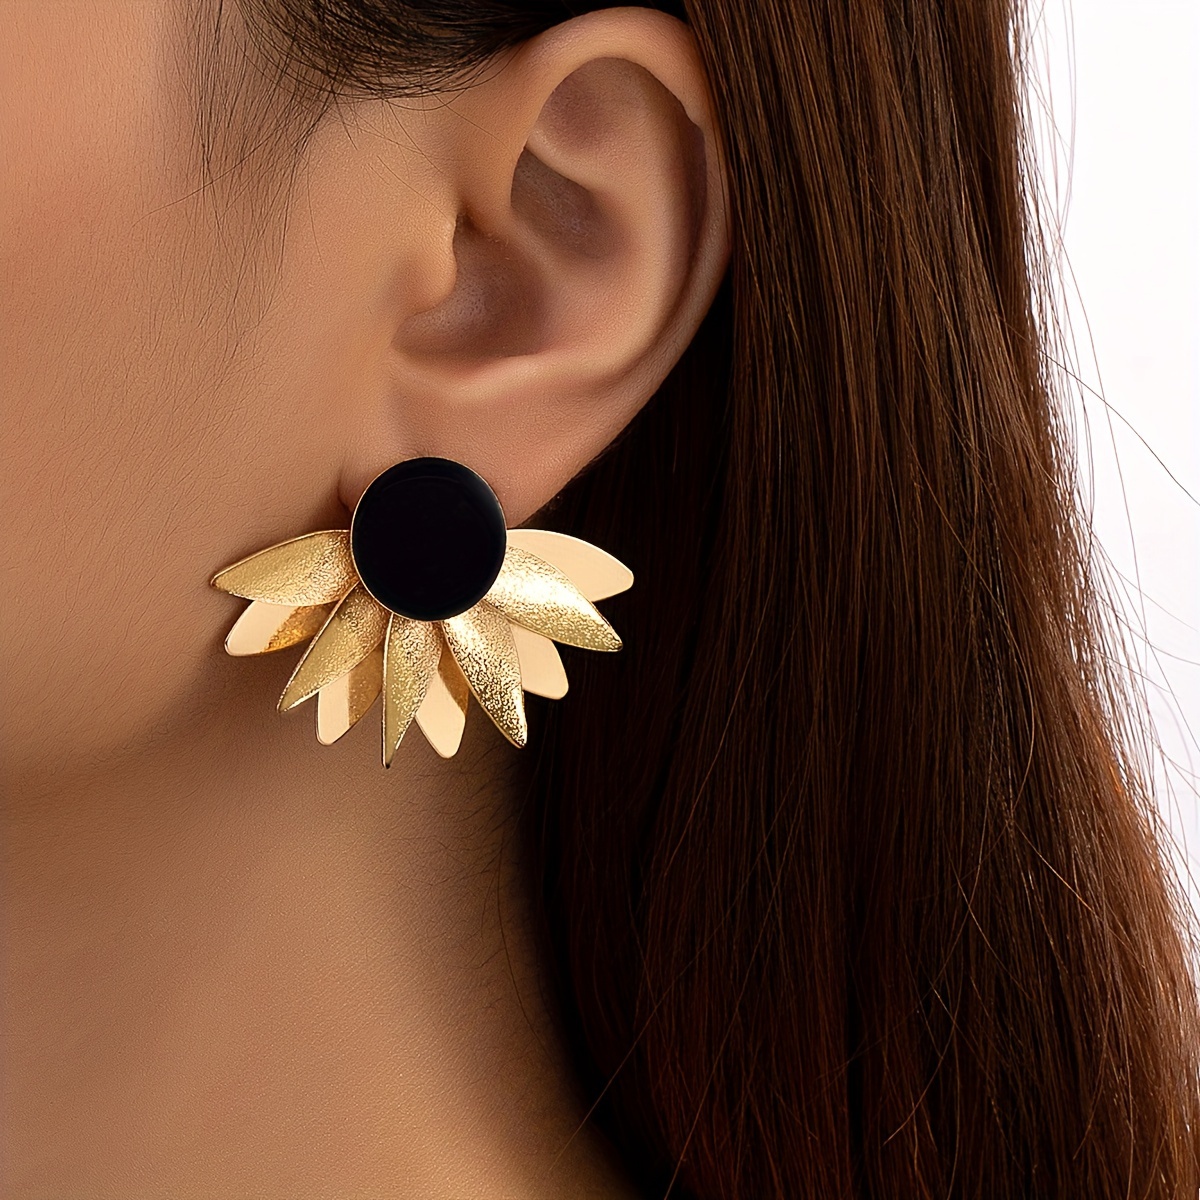 

Unique Round Piece With Leaf Fan Design Stud Earrings Iron Jewelry Bohemian Elegant Style Female Gift